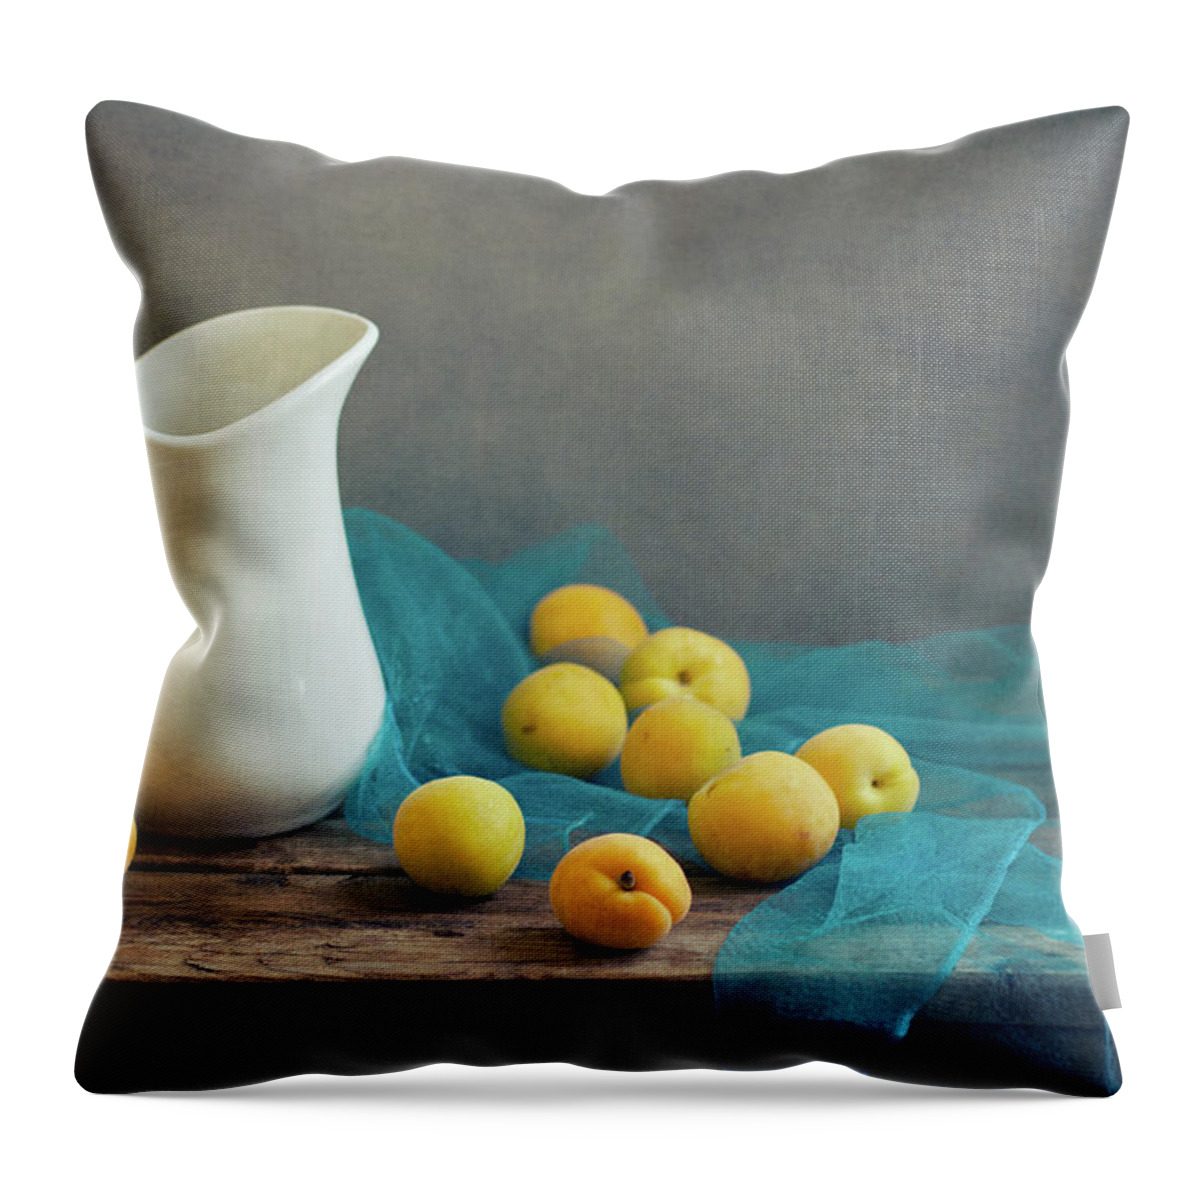 Apricot Throw Pillow featuring the photograph Still Life With Apricots And White Jug by Copyright Anna Nemoy(xaomena)